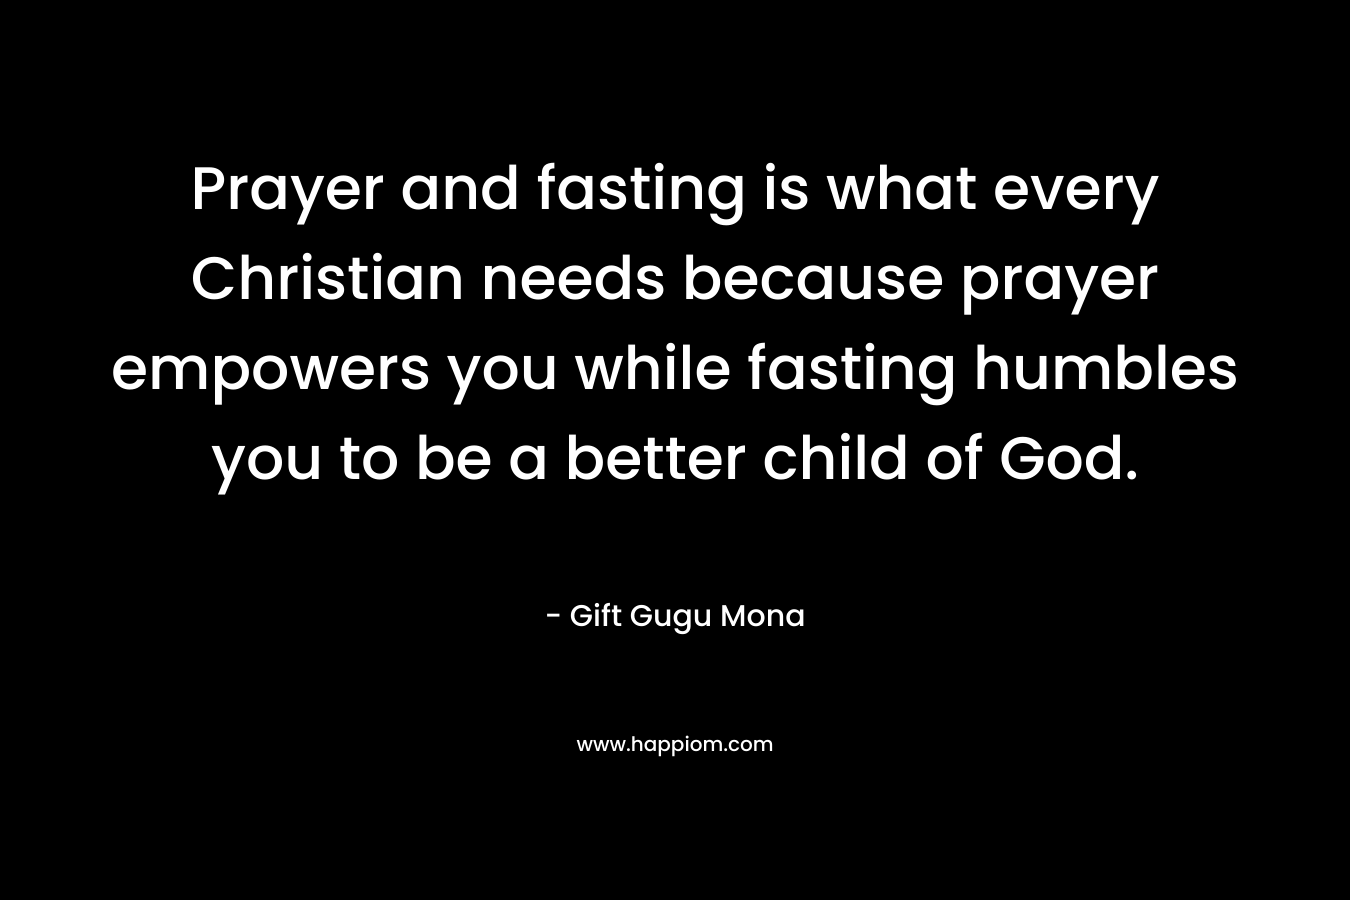 Prayer and fasting is what every Christian needs because prayer empowers you while fasting humbles you to be a better child of God.